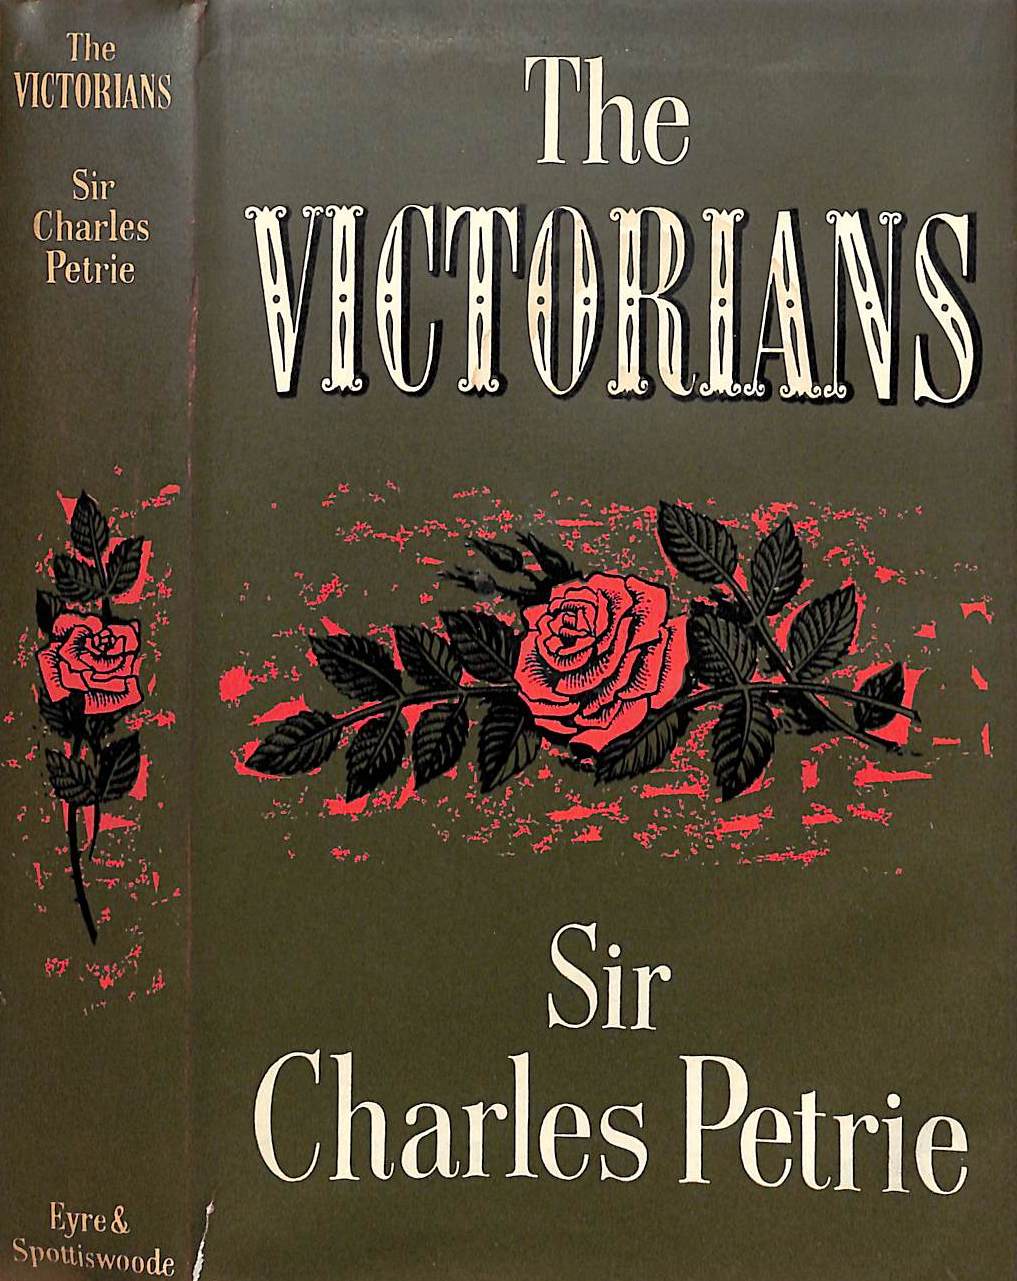 "The Victorians" 1960 PETRIE, Sir Charles